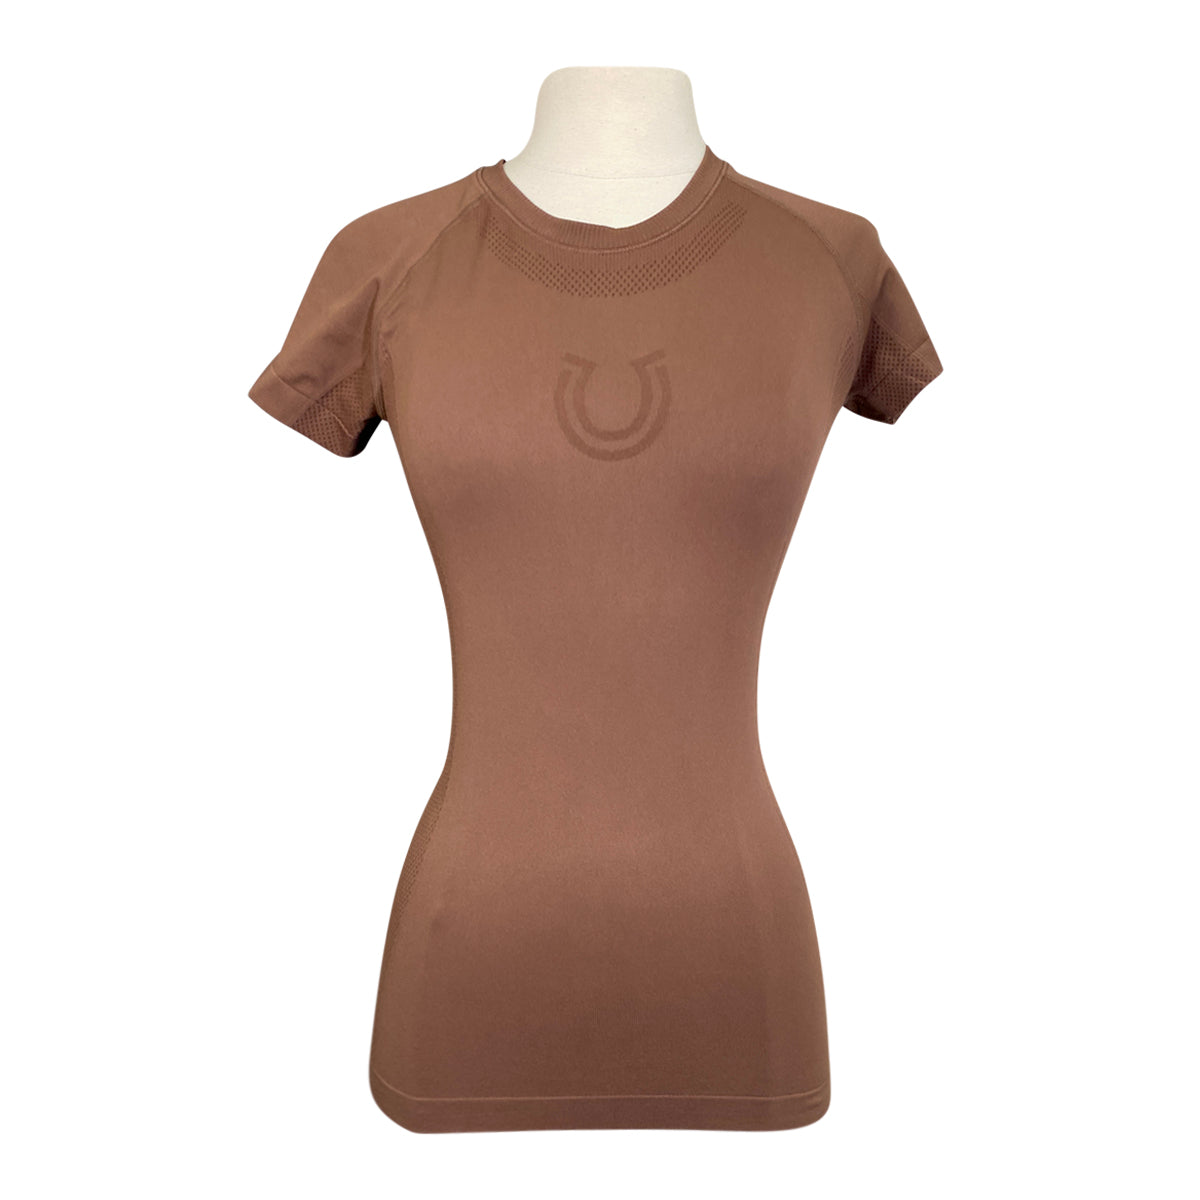 FitEq Short Sleeve Seamless Schooling Top in Cocoa